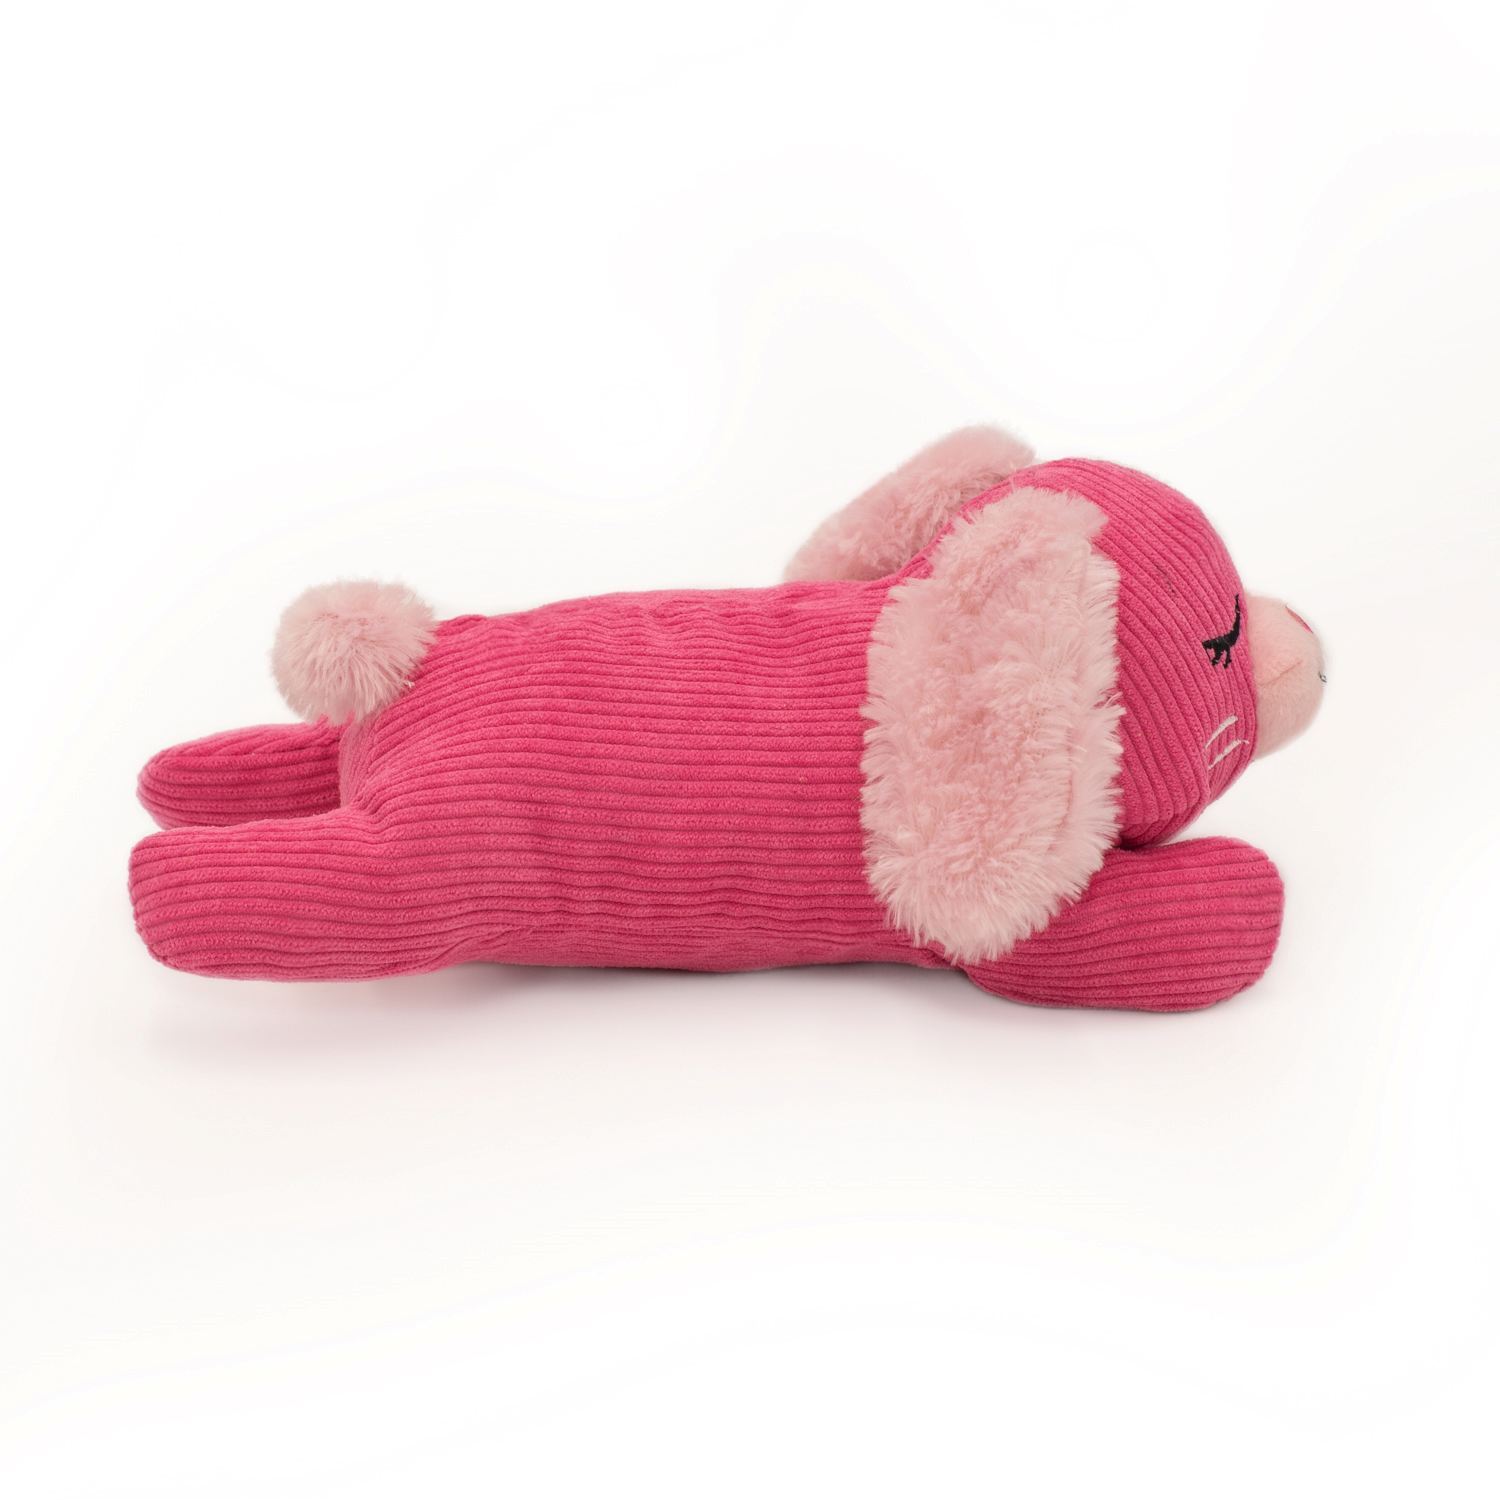 Zippy Paws Snooziez with Silent Shhhqueaker Plush Dog Toy - Bunny  image 1